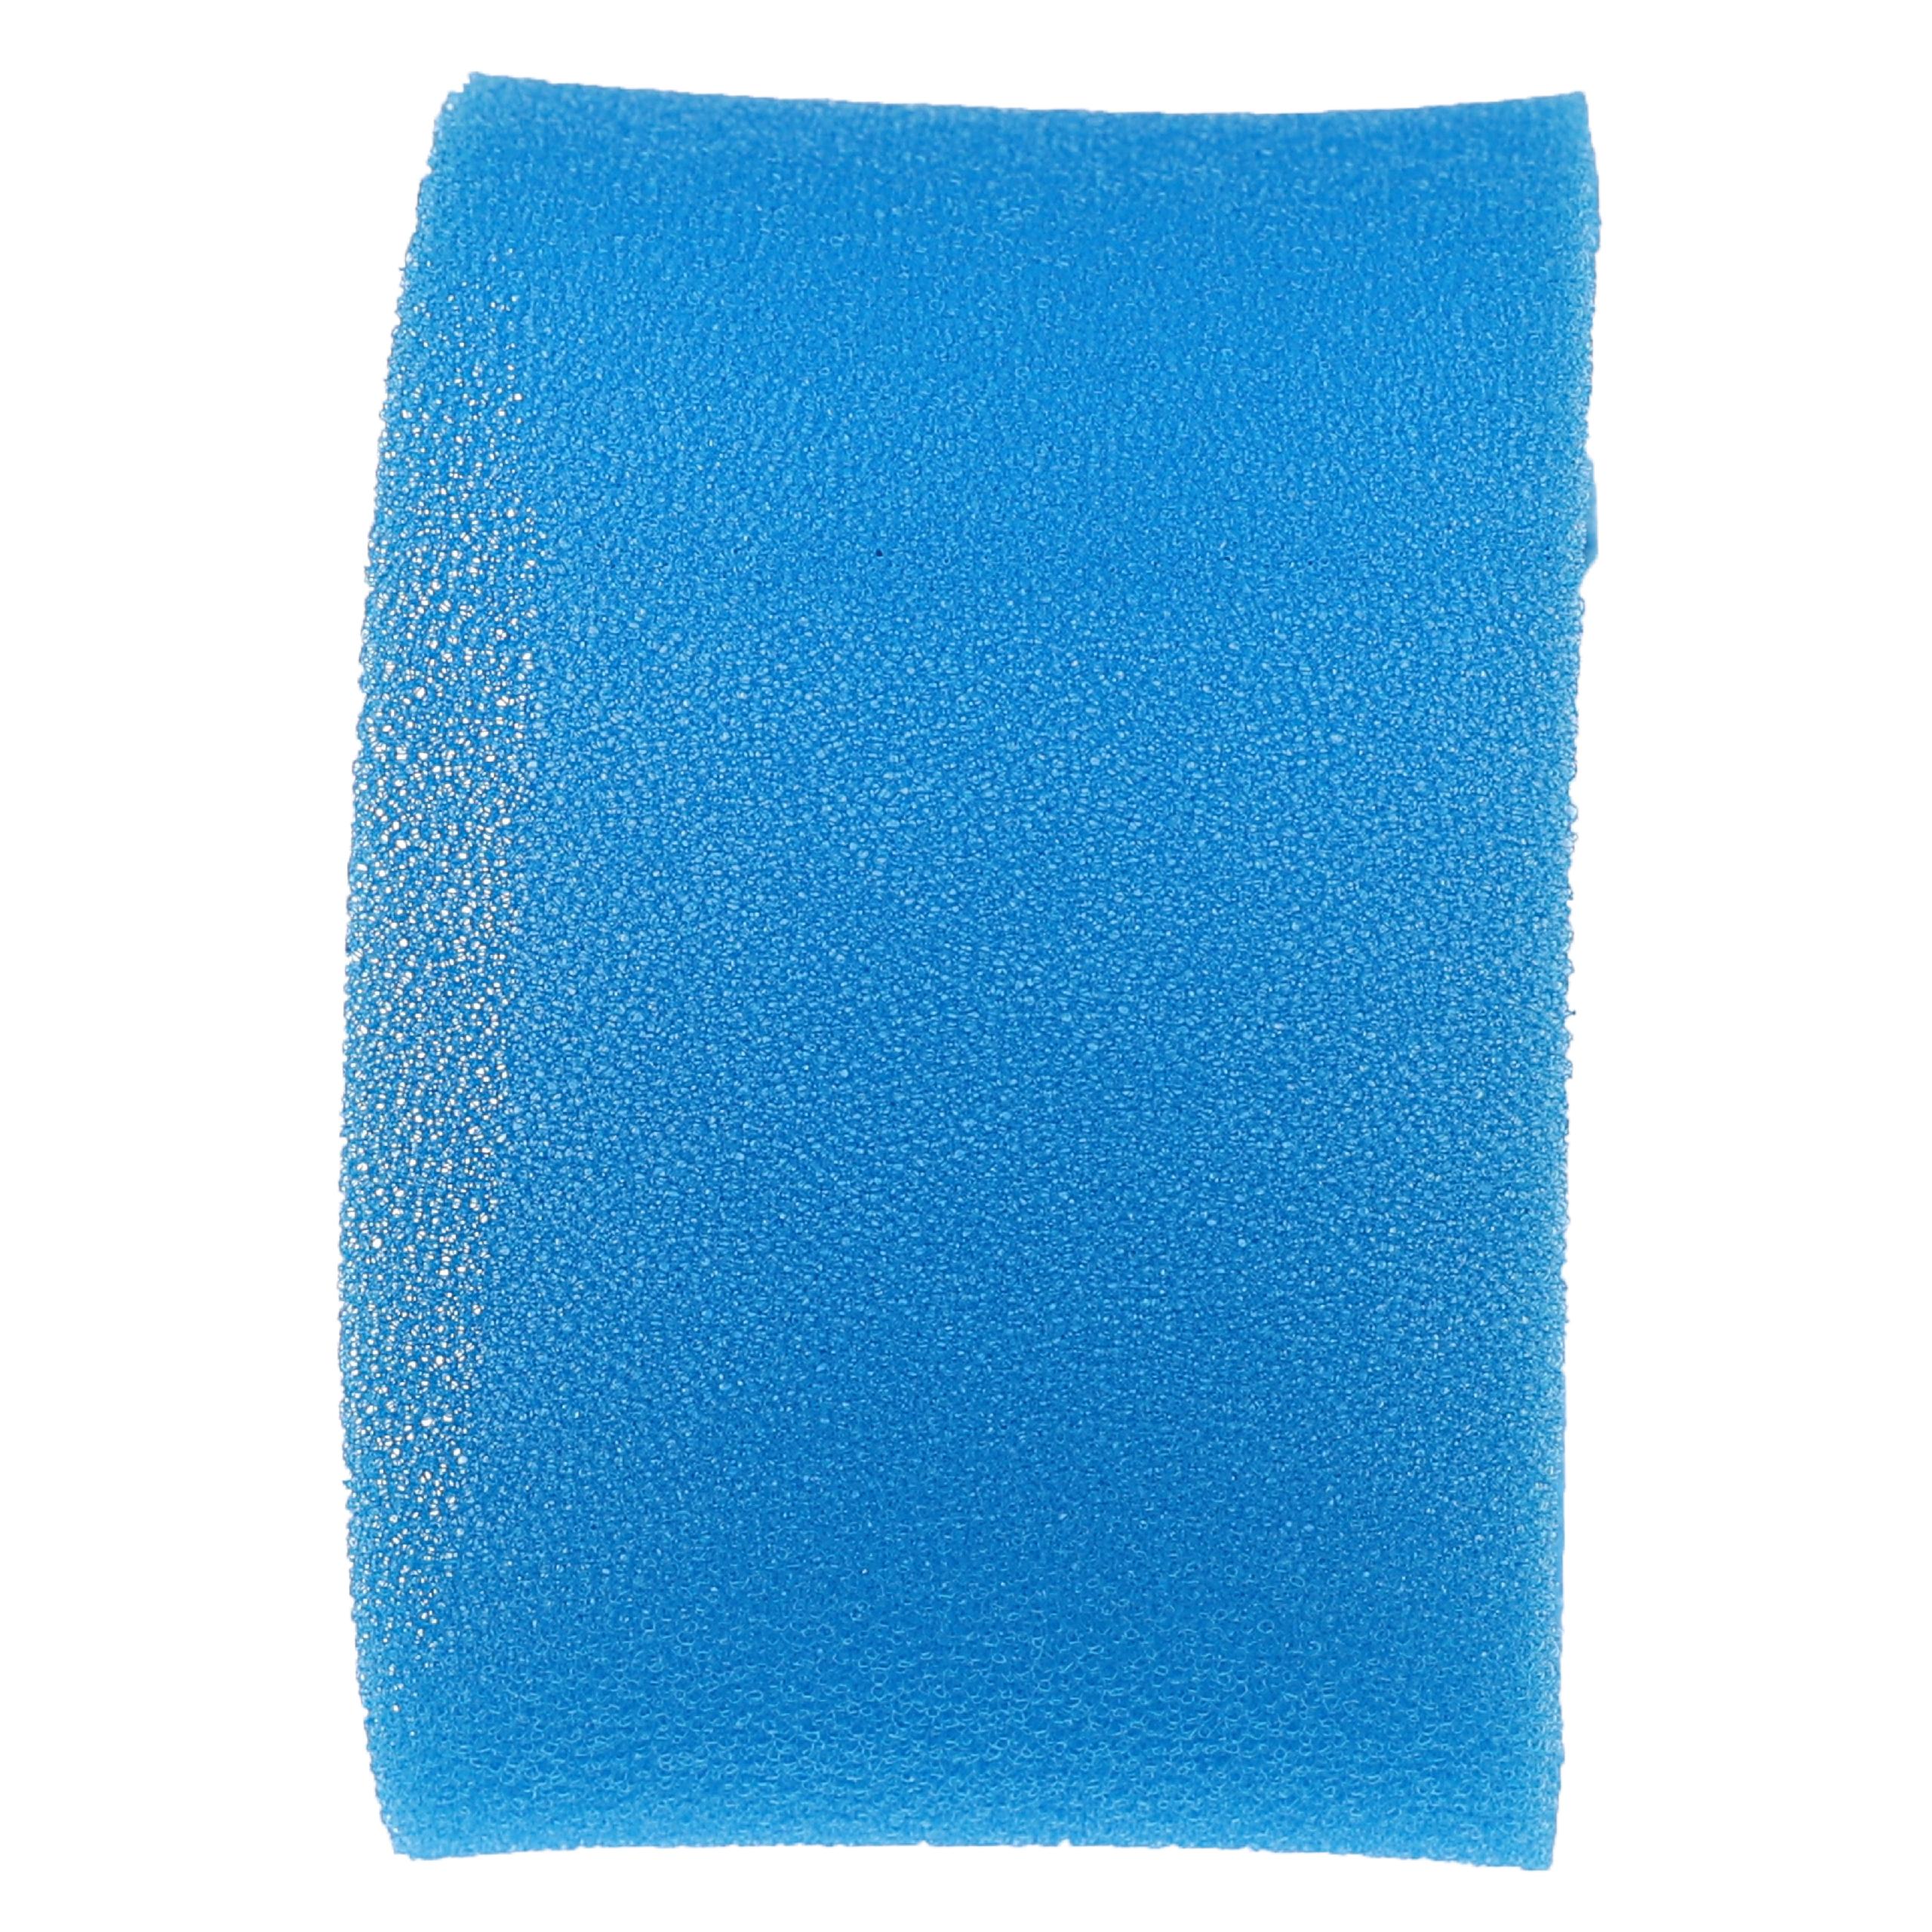 3x Steam Cleaner Filter as Replacement for Kärcher Filter Sponge 6.402-024.0